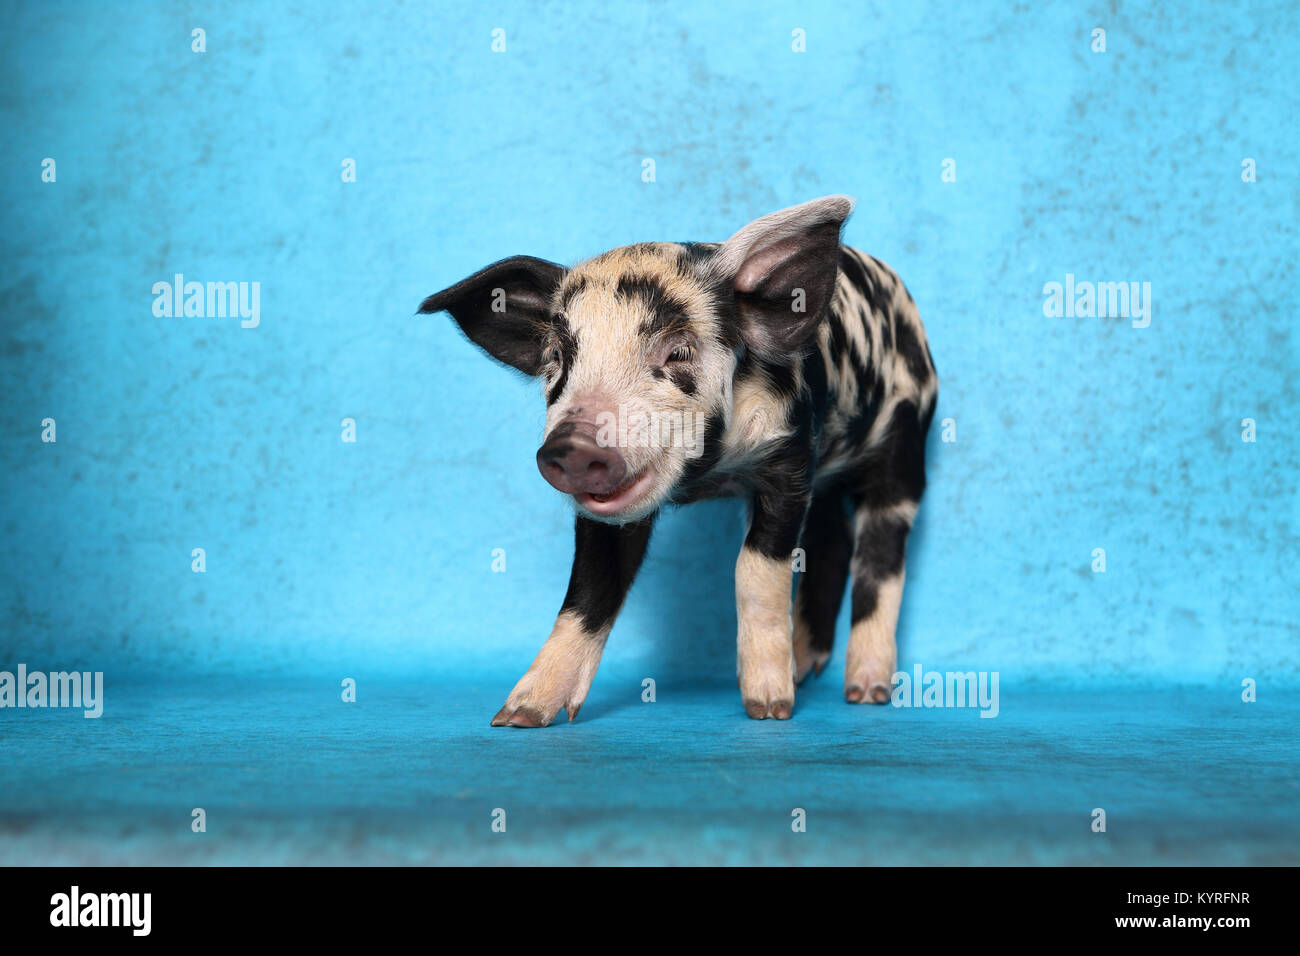 Domestic Pig, Turopolje x ?. Piglet (2 weeks old) standing. Studio picture seen against a blue background. Germany Stock Photo